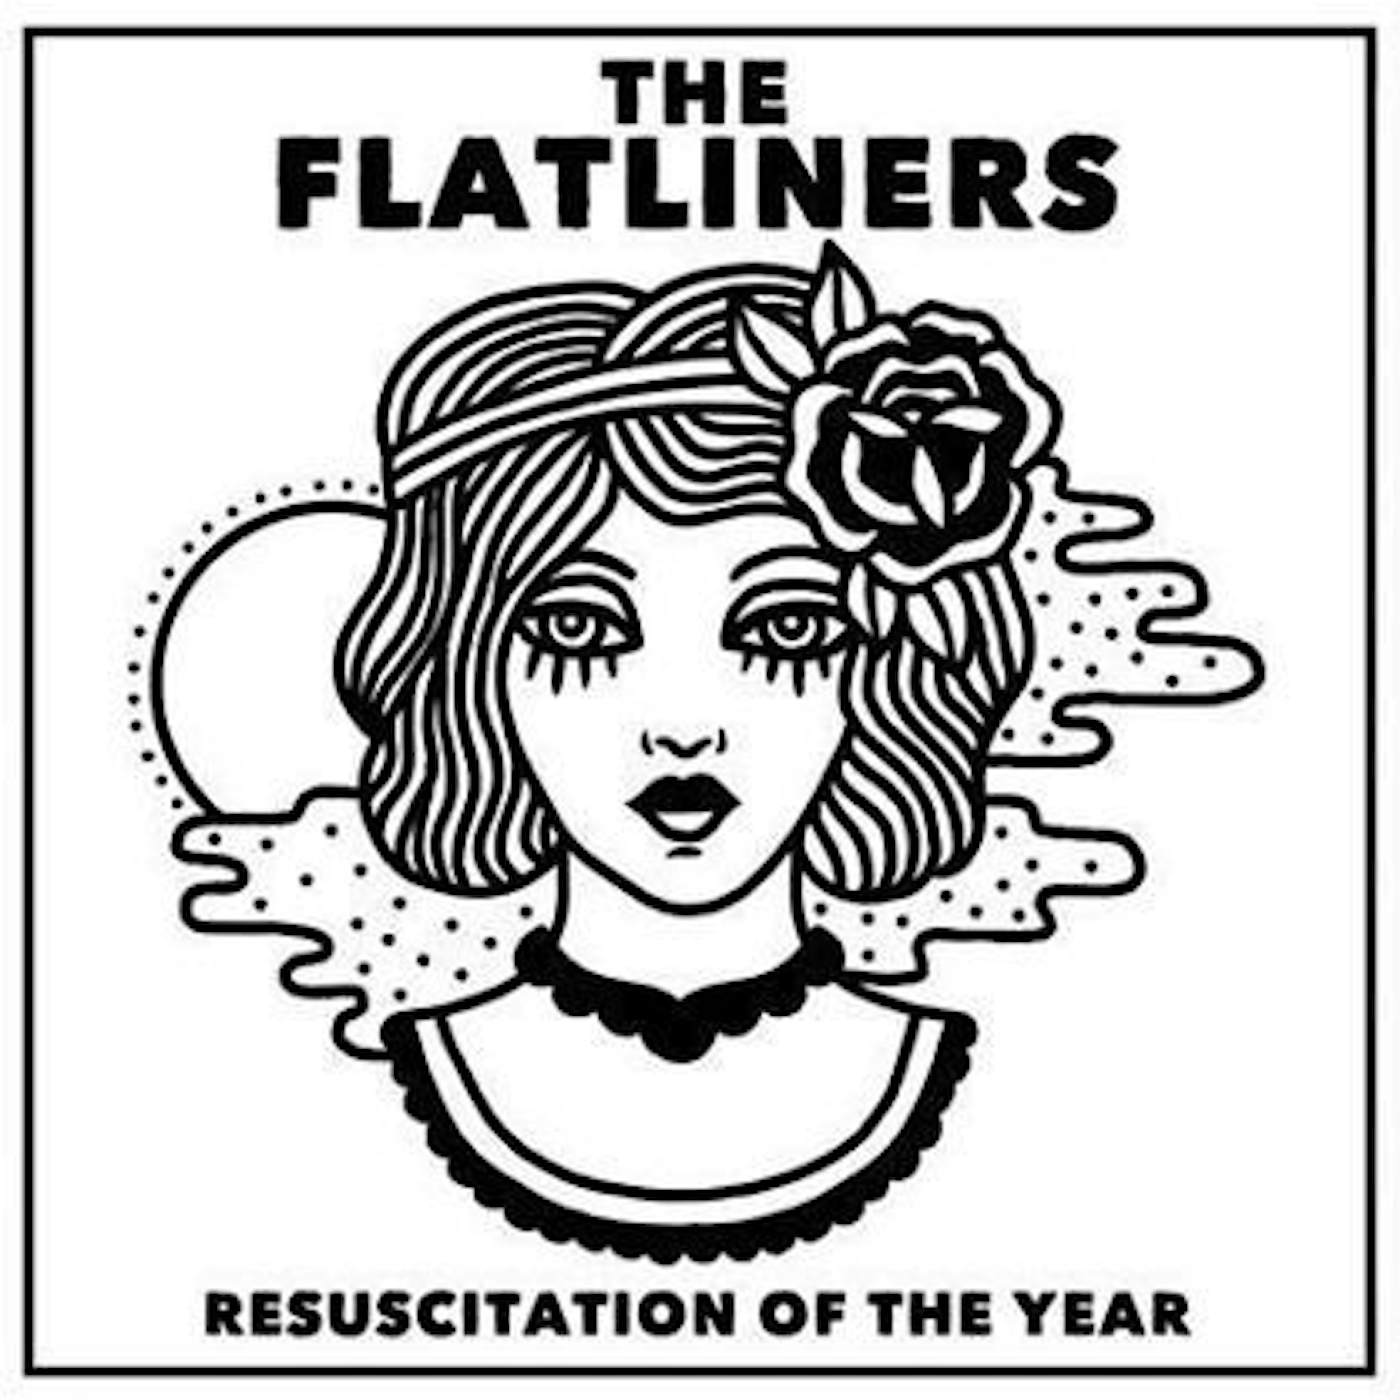 The Flatliners Resuscitation of the Year Vinyl Record